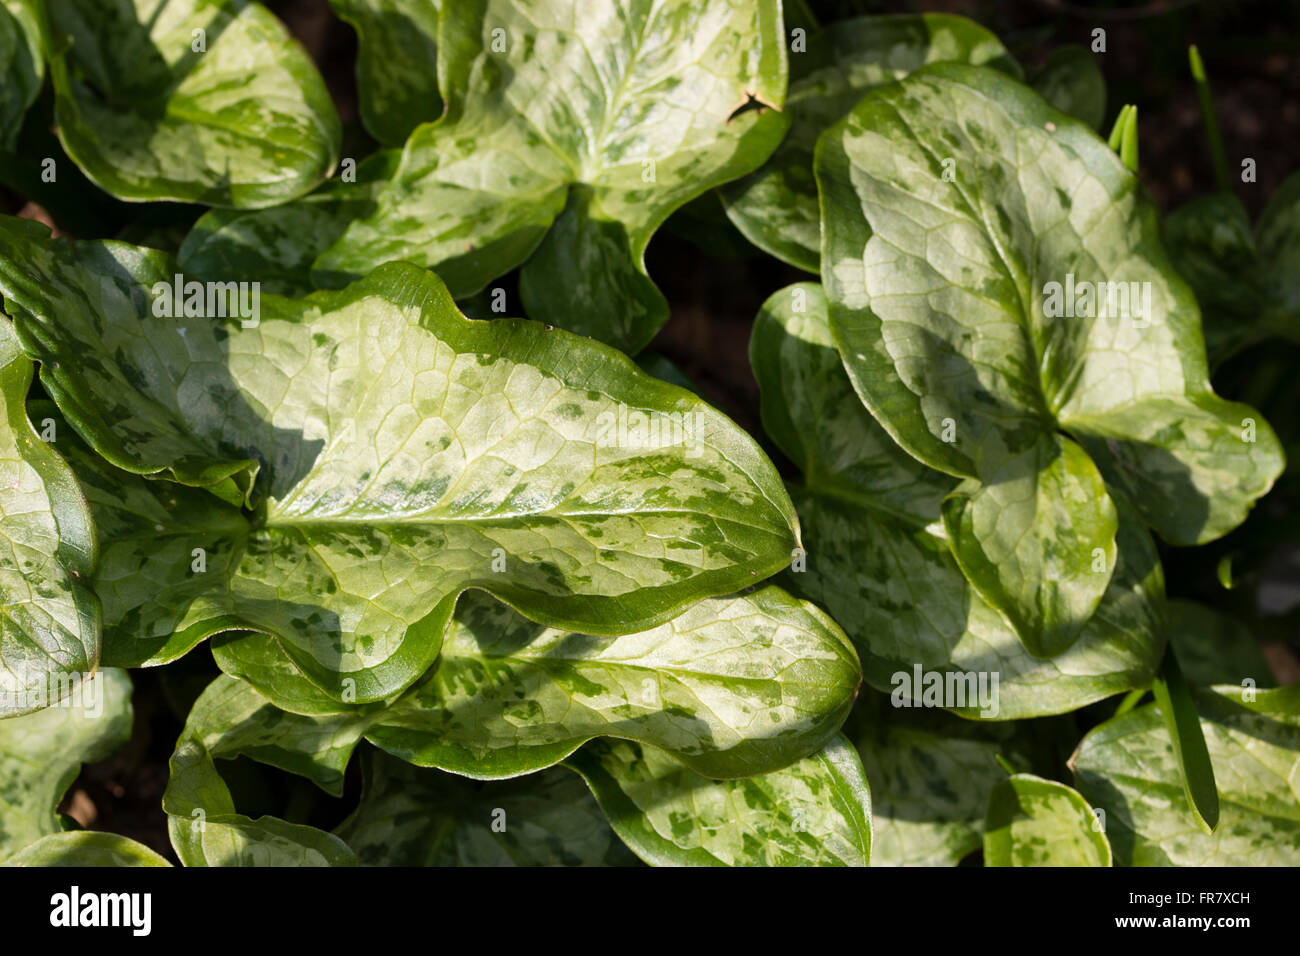 Marbled foliage of the winter and spring foliaged corm, Arum italicum 'Chameleon' Stock Photo